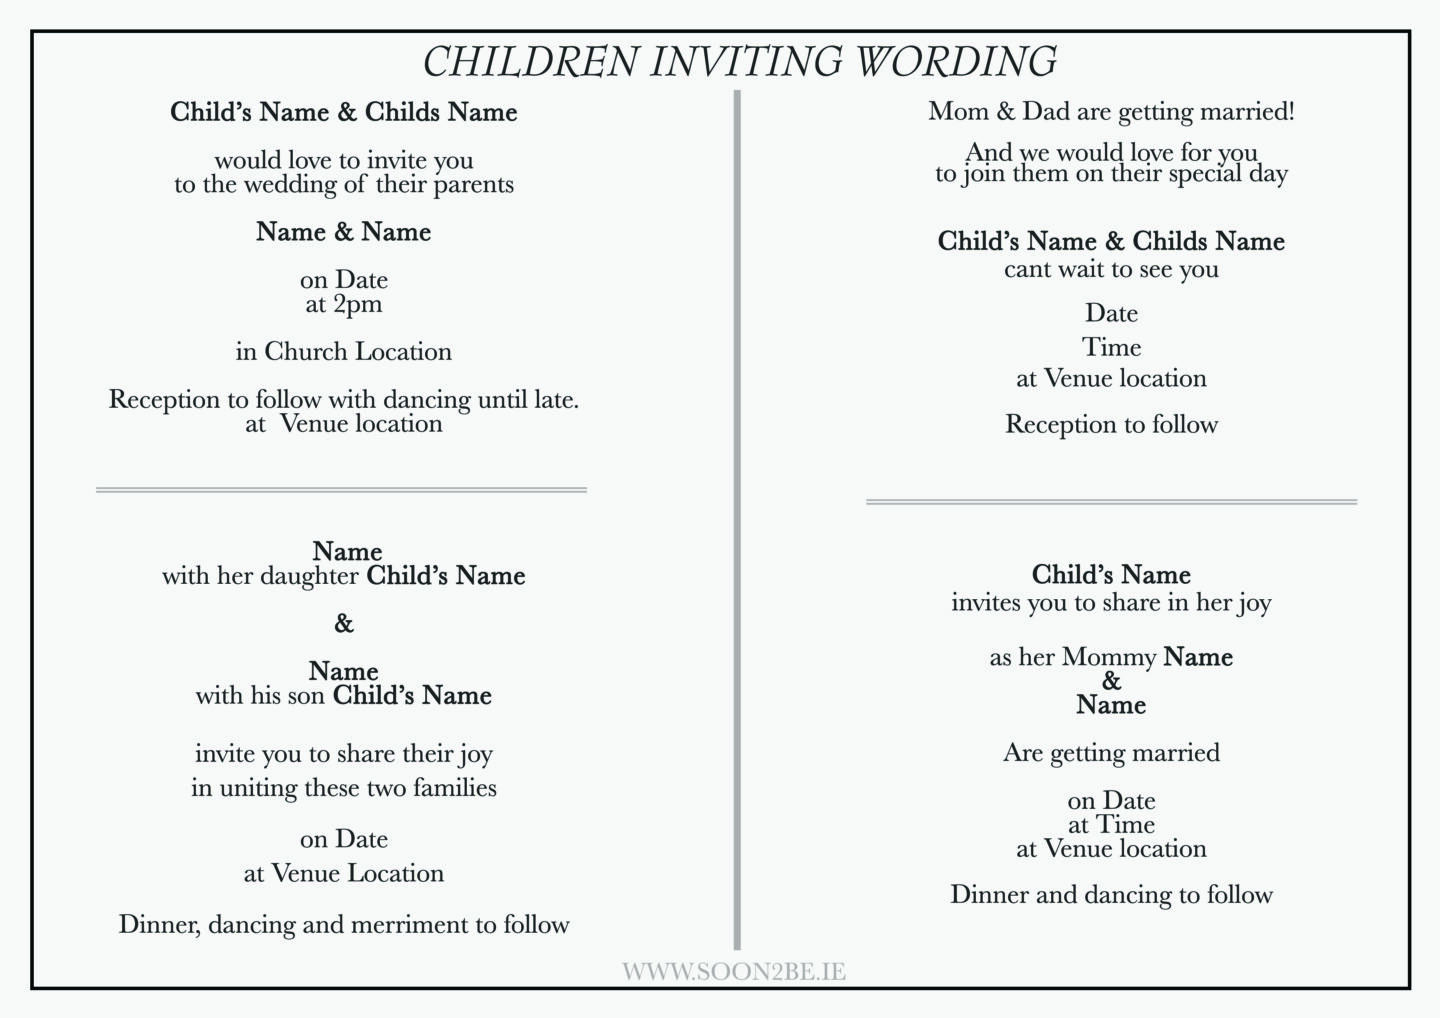 Wedding Invitation Wording When Children Of The Bride And Groom Are Inviting